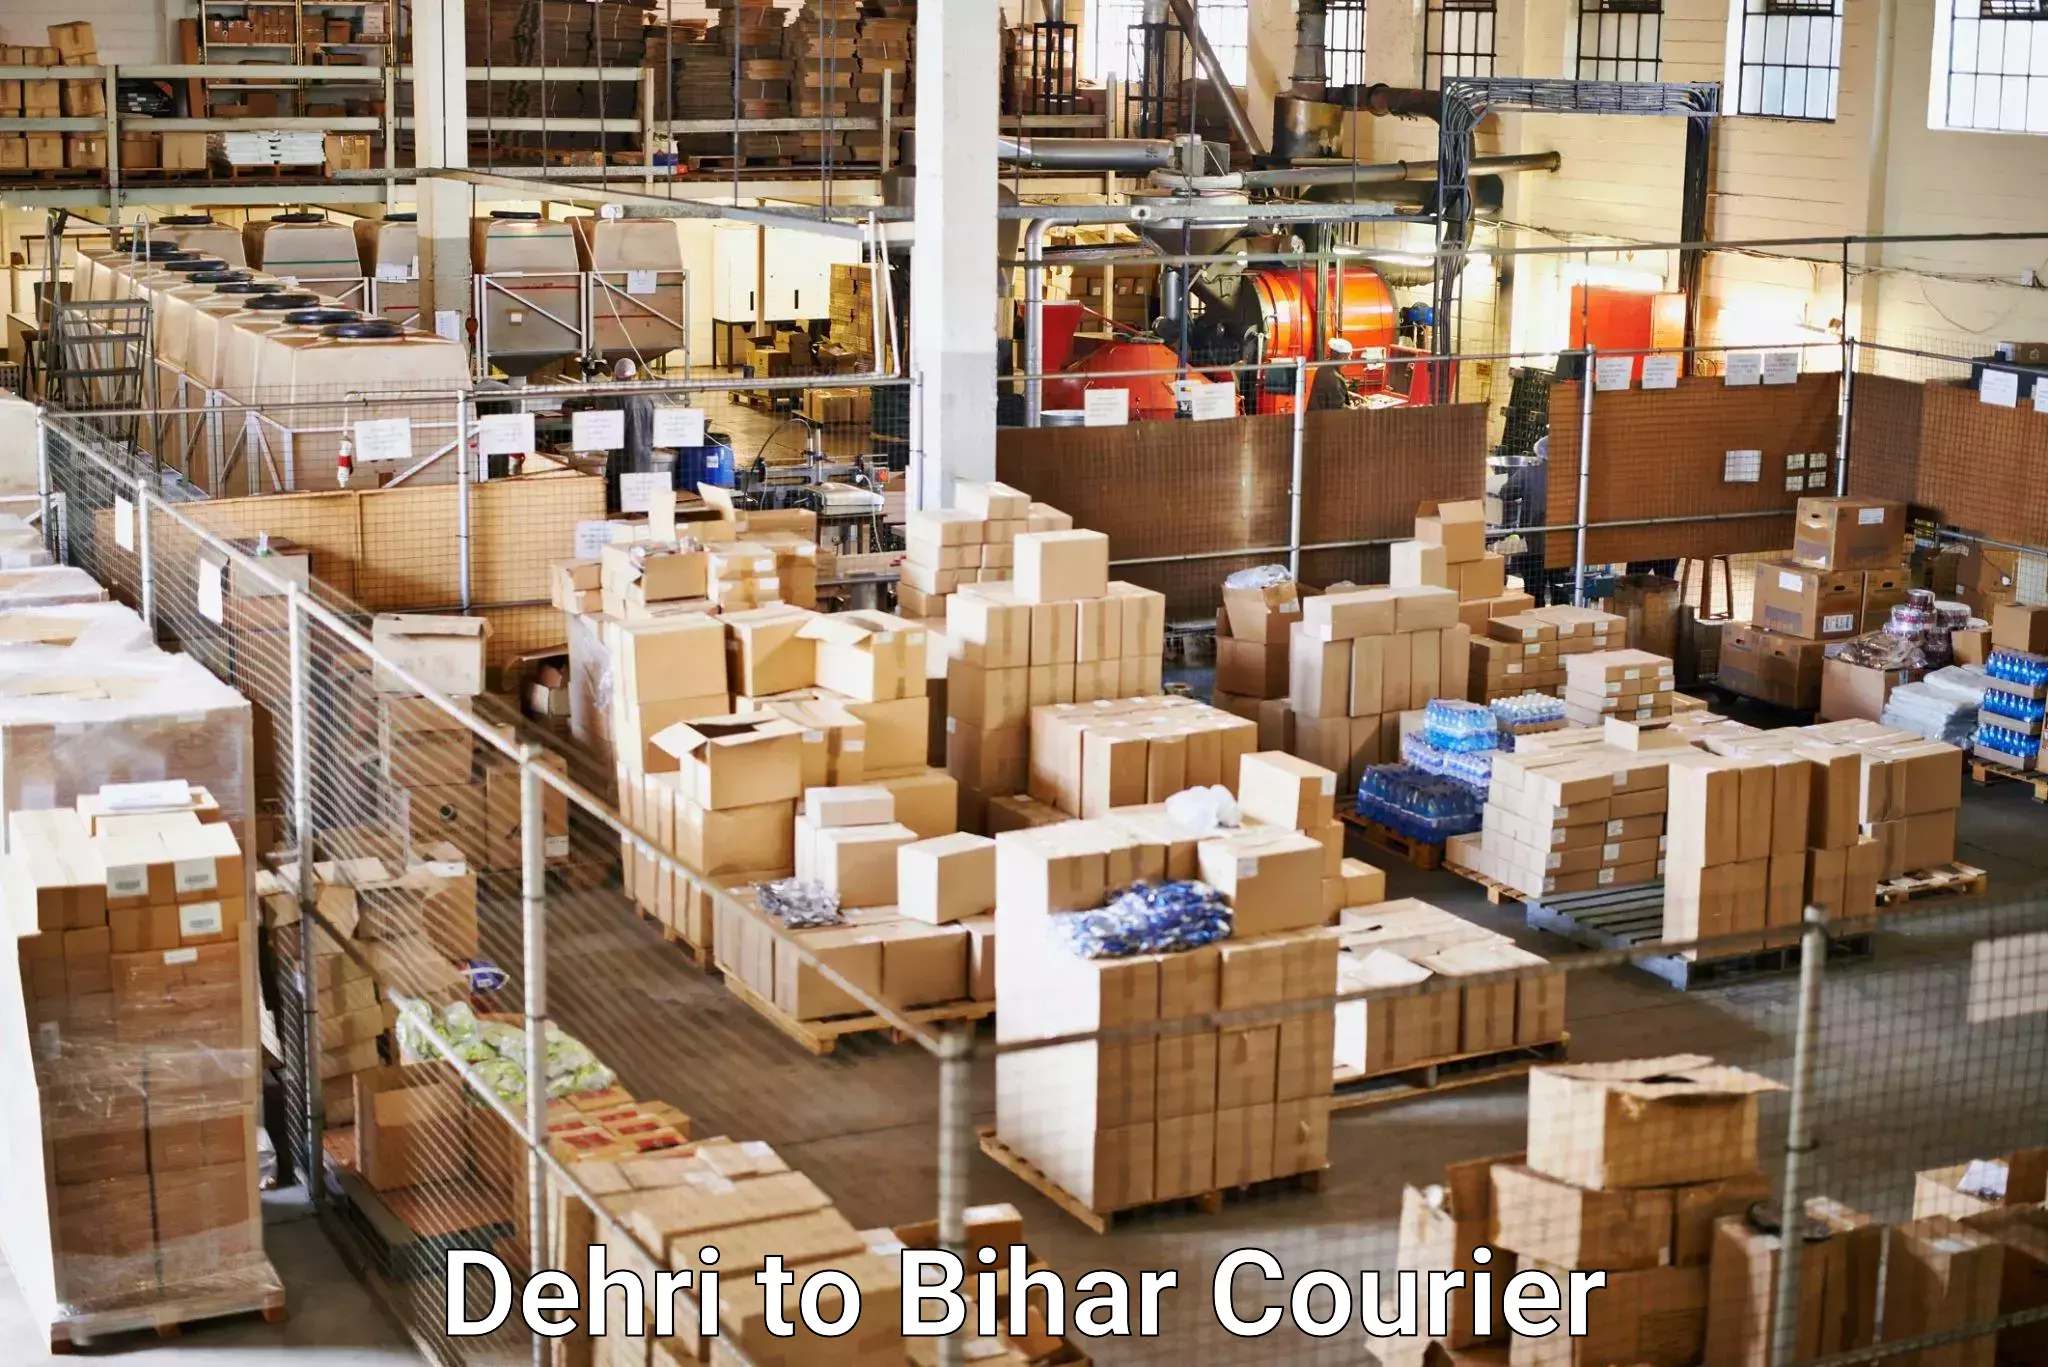 Same-day delivery options in Dehri to Bihar